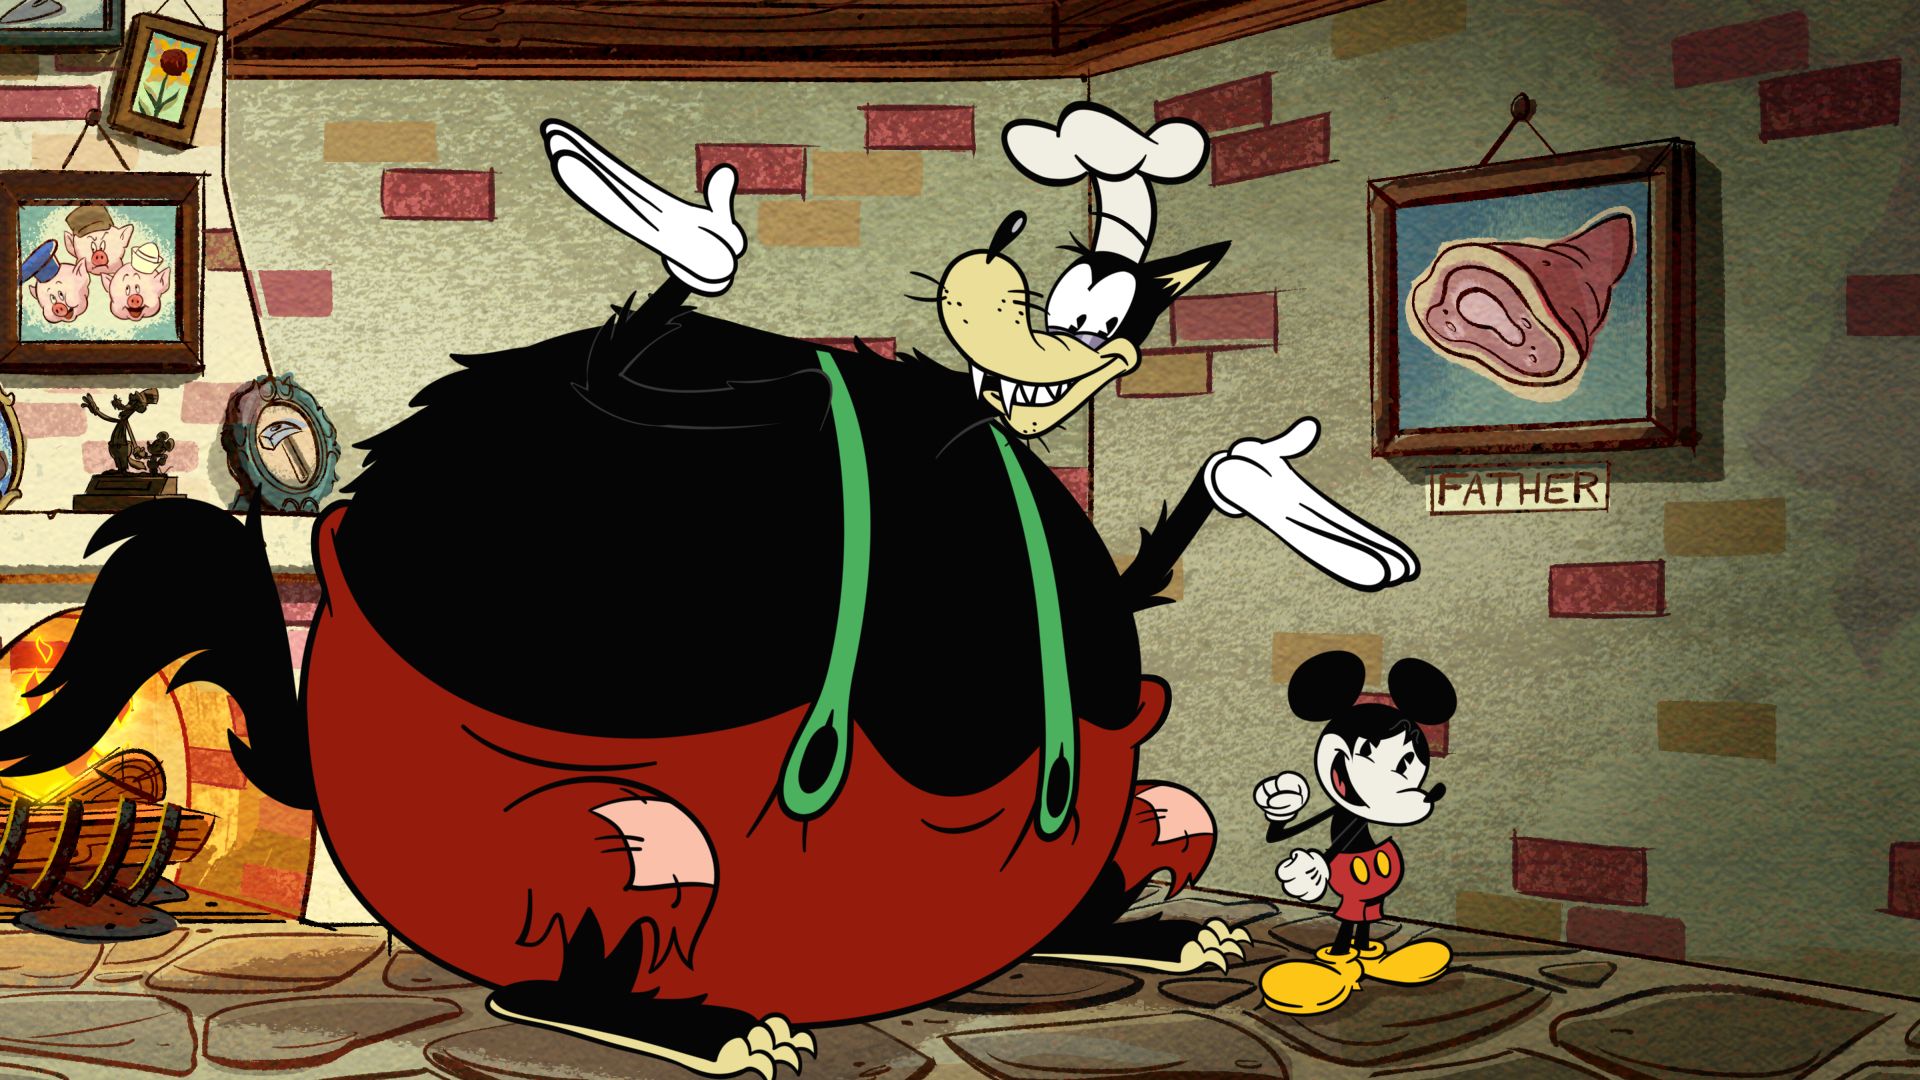 Amazing Images From The Wonderful World of Mickey Mouse [EXCLUSIVE]